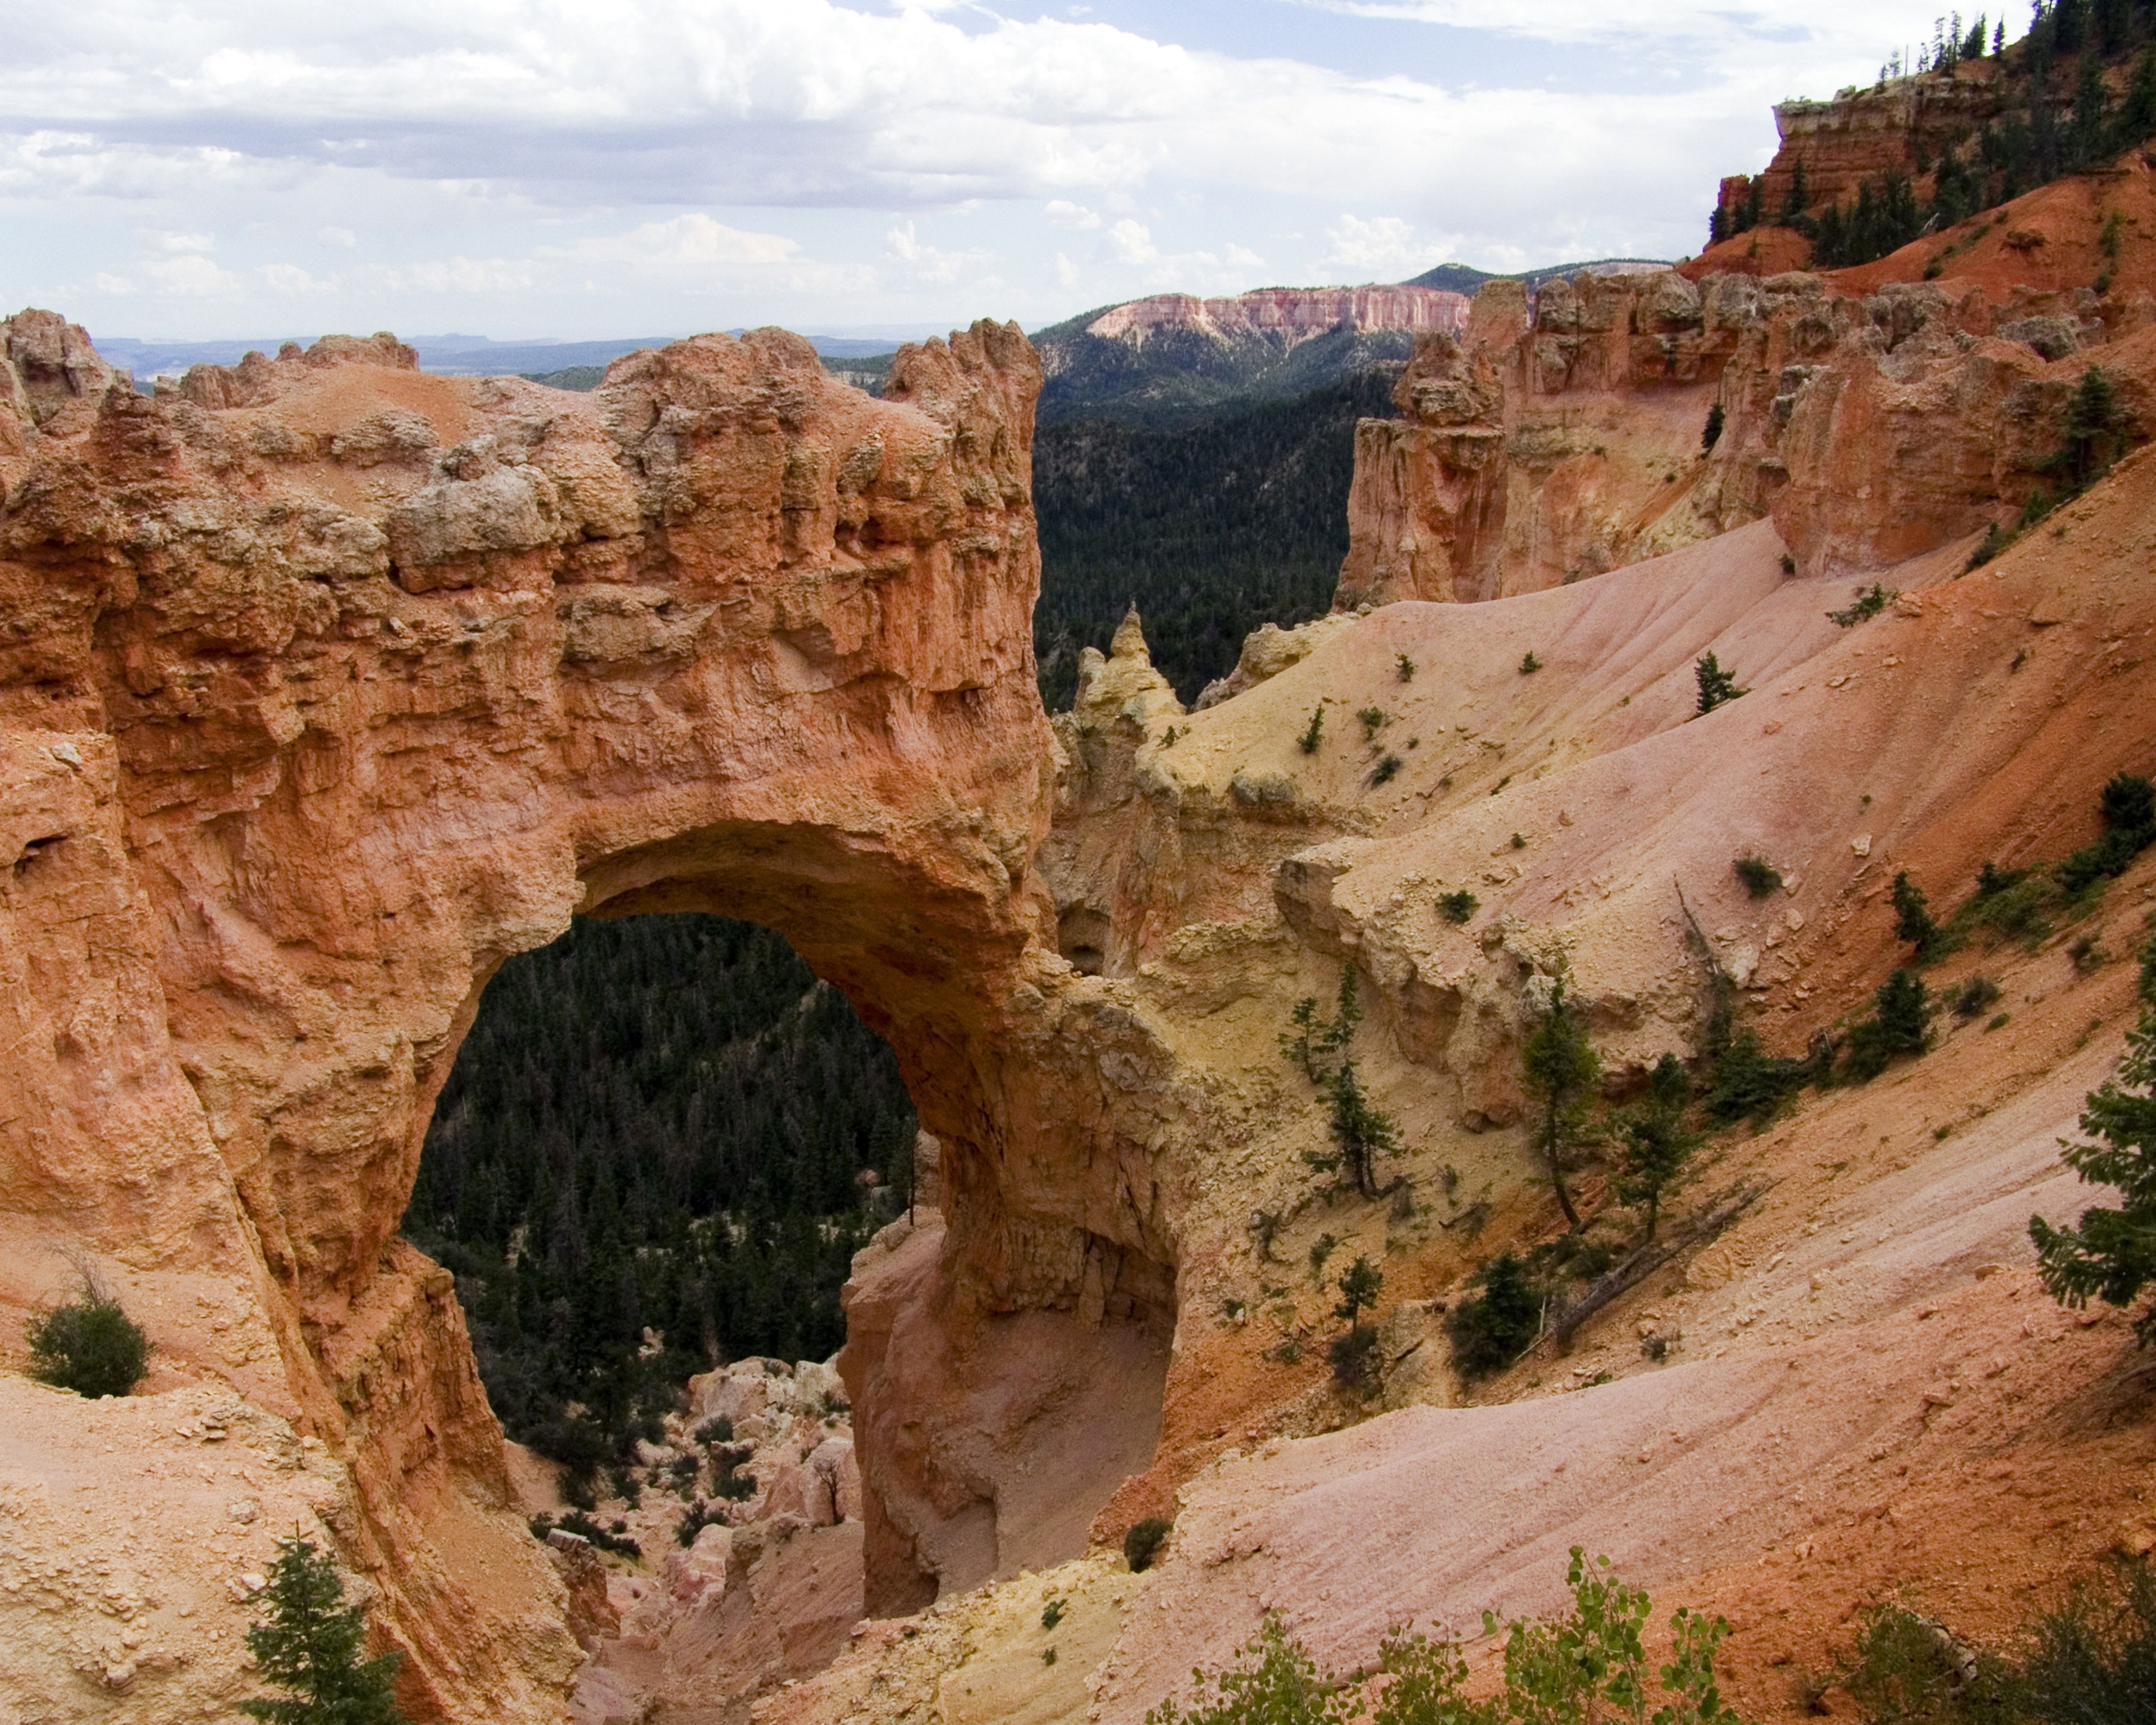 A red rock arch in a canyon.